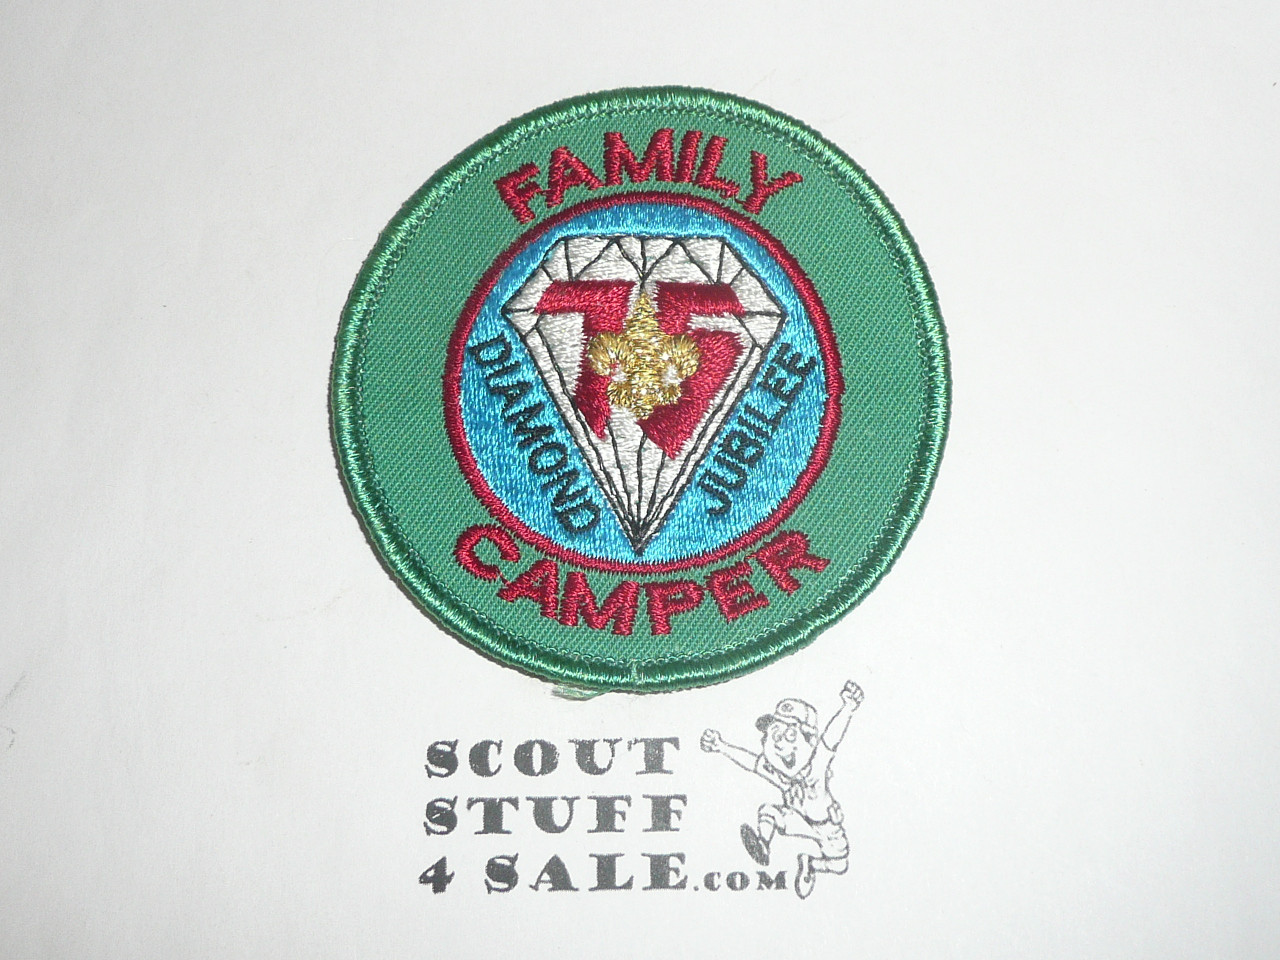 75th BSA Anniversary Patch, Family Camper (in red)